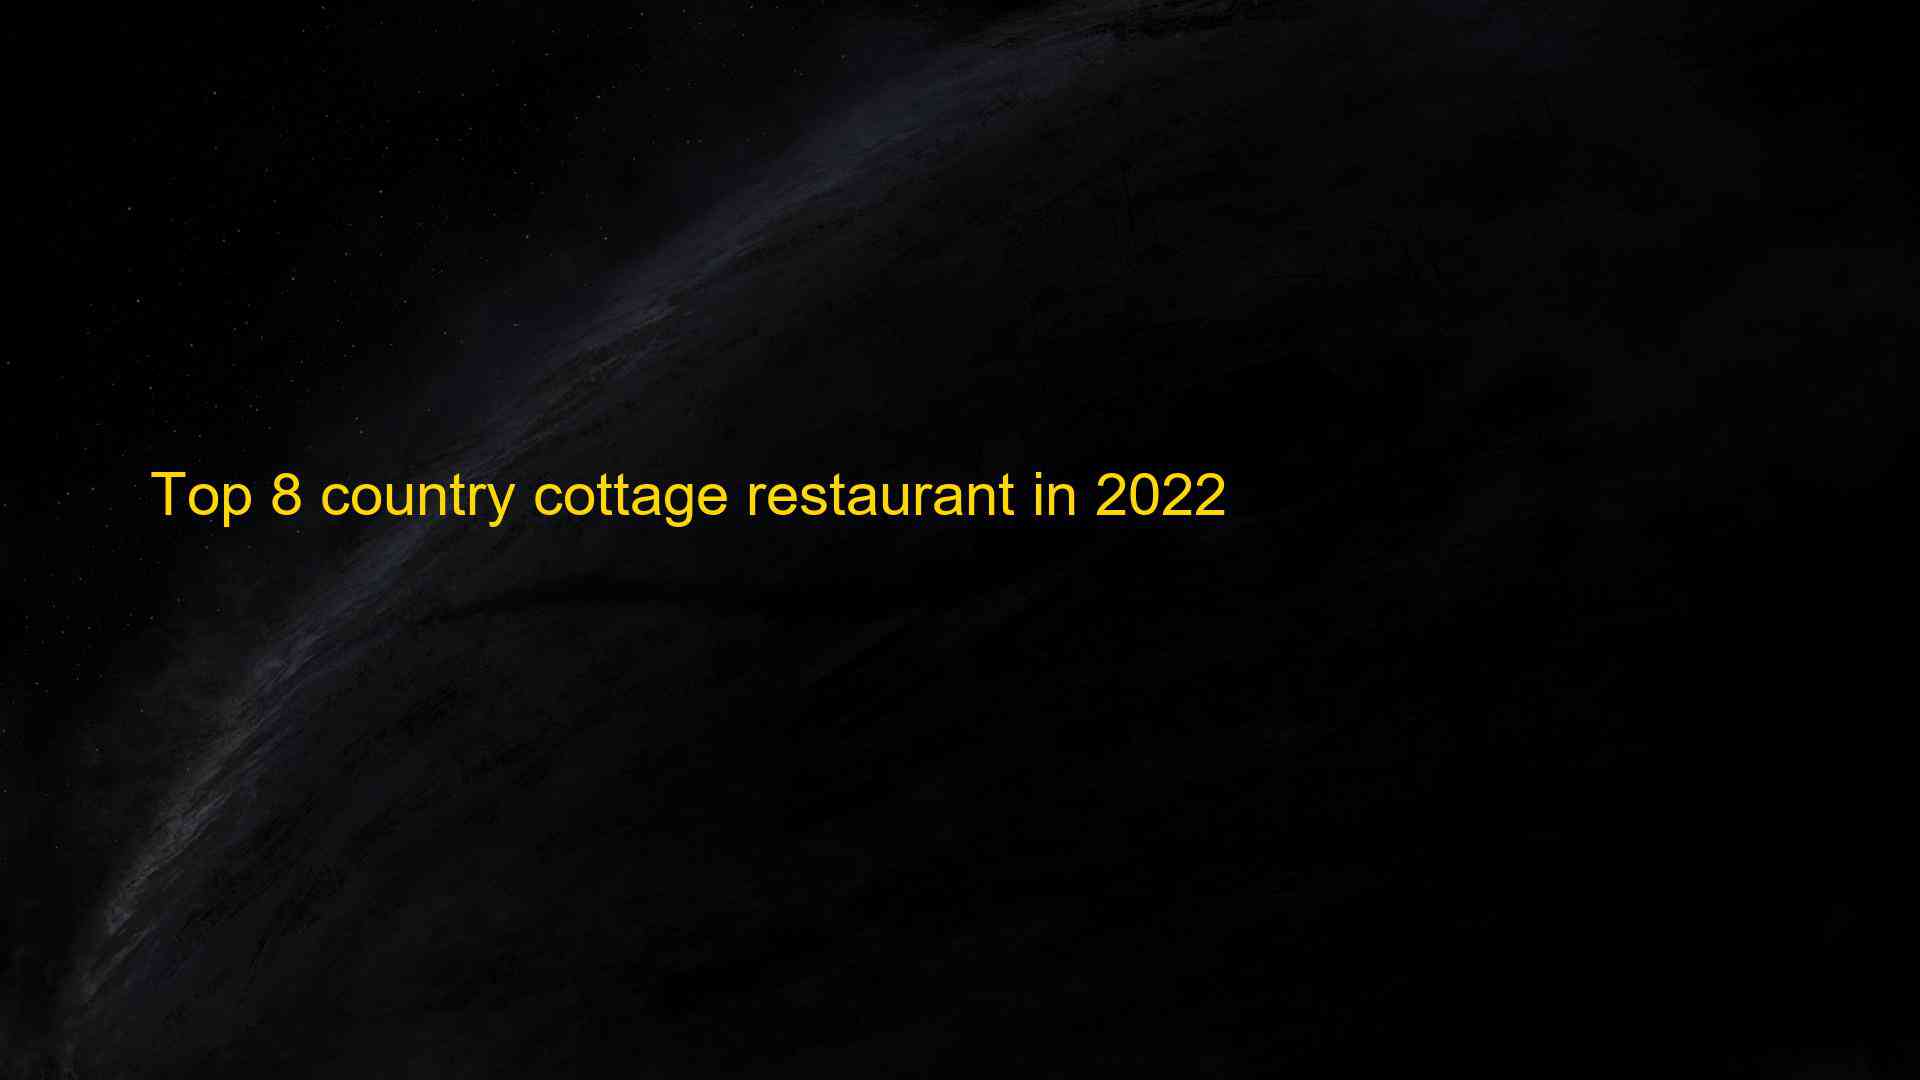 Top 8 country cottage restaurant in 2022 1663504234